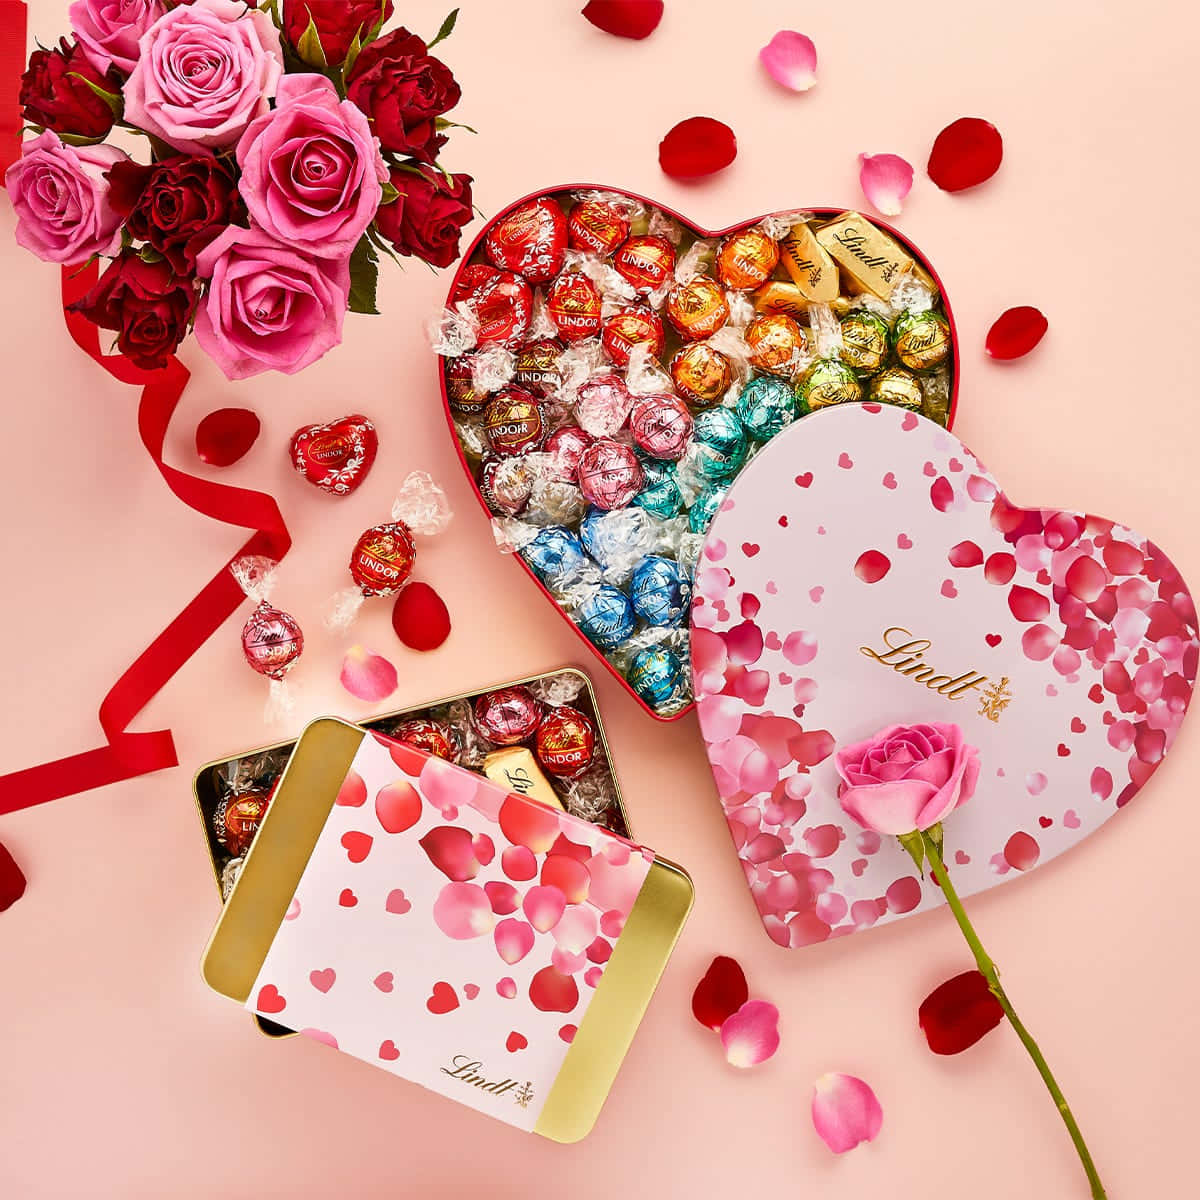 Heart Box Of Chocolates Valentine's Day Pictures 1200 x 1200 Picture